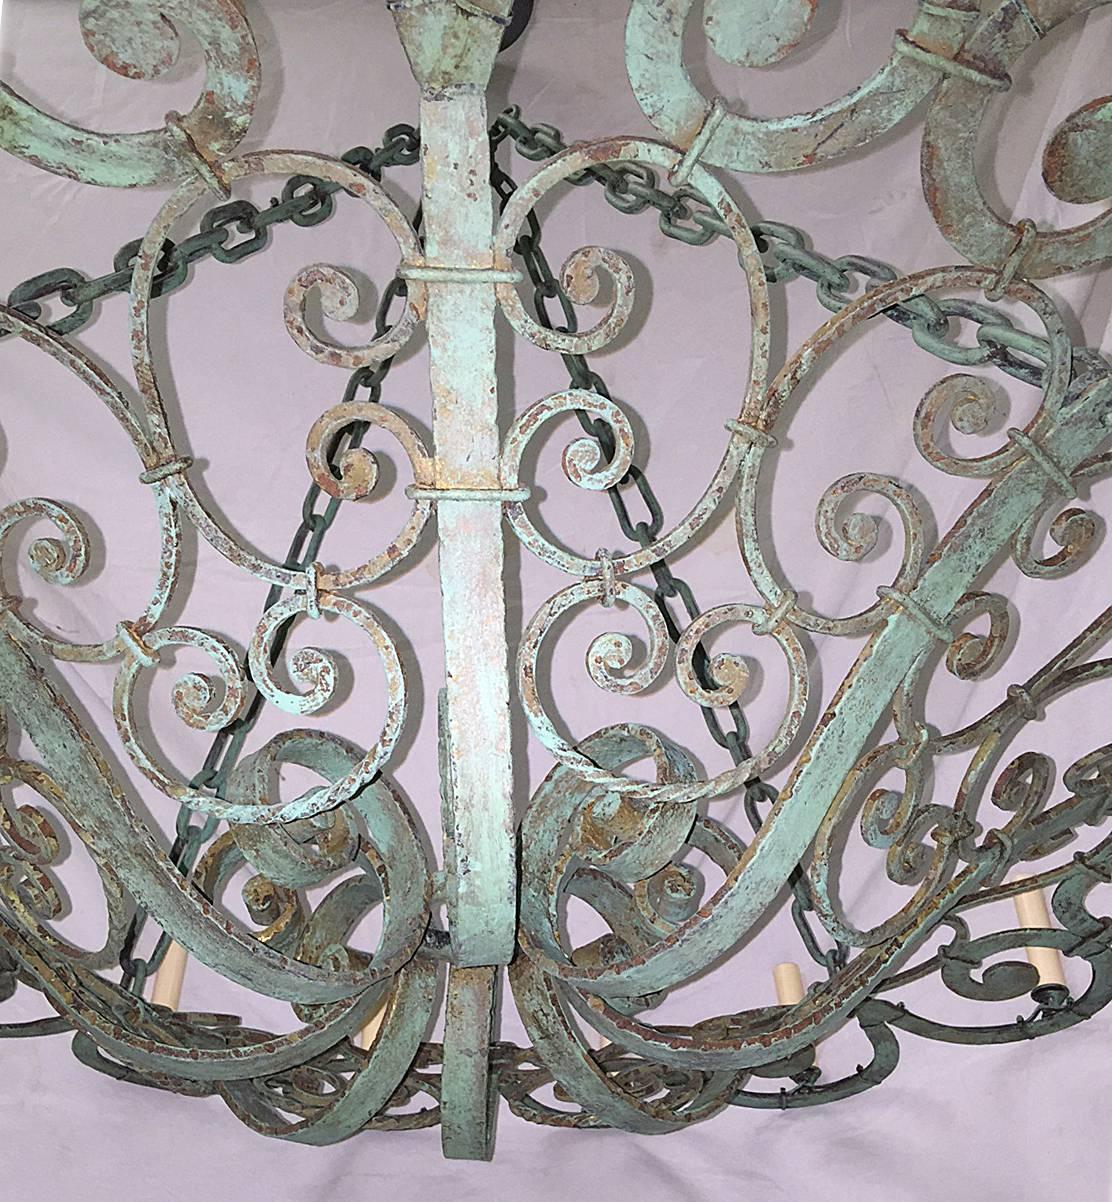 A French circa 1920s wrought iron chandelier with 16 lights, with painted finish. Body with scrolling motif, original patina. 

Measurements:
42